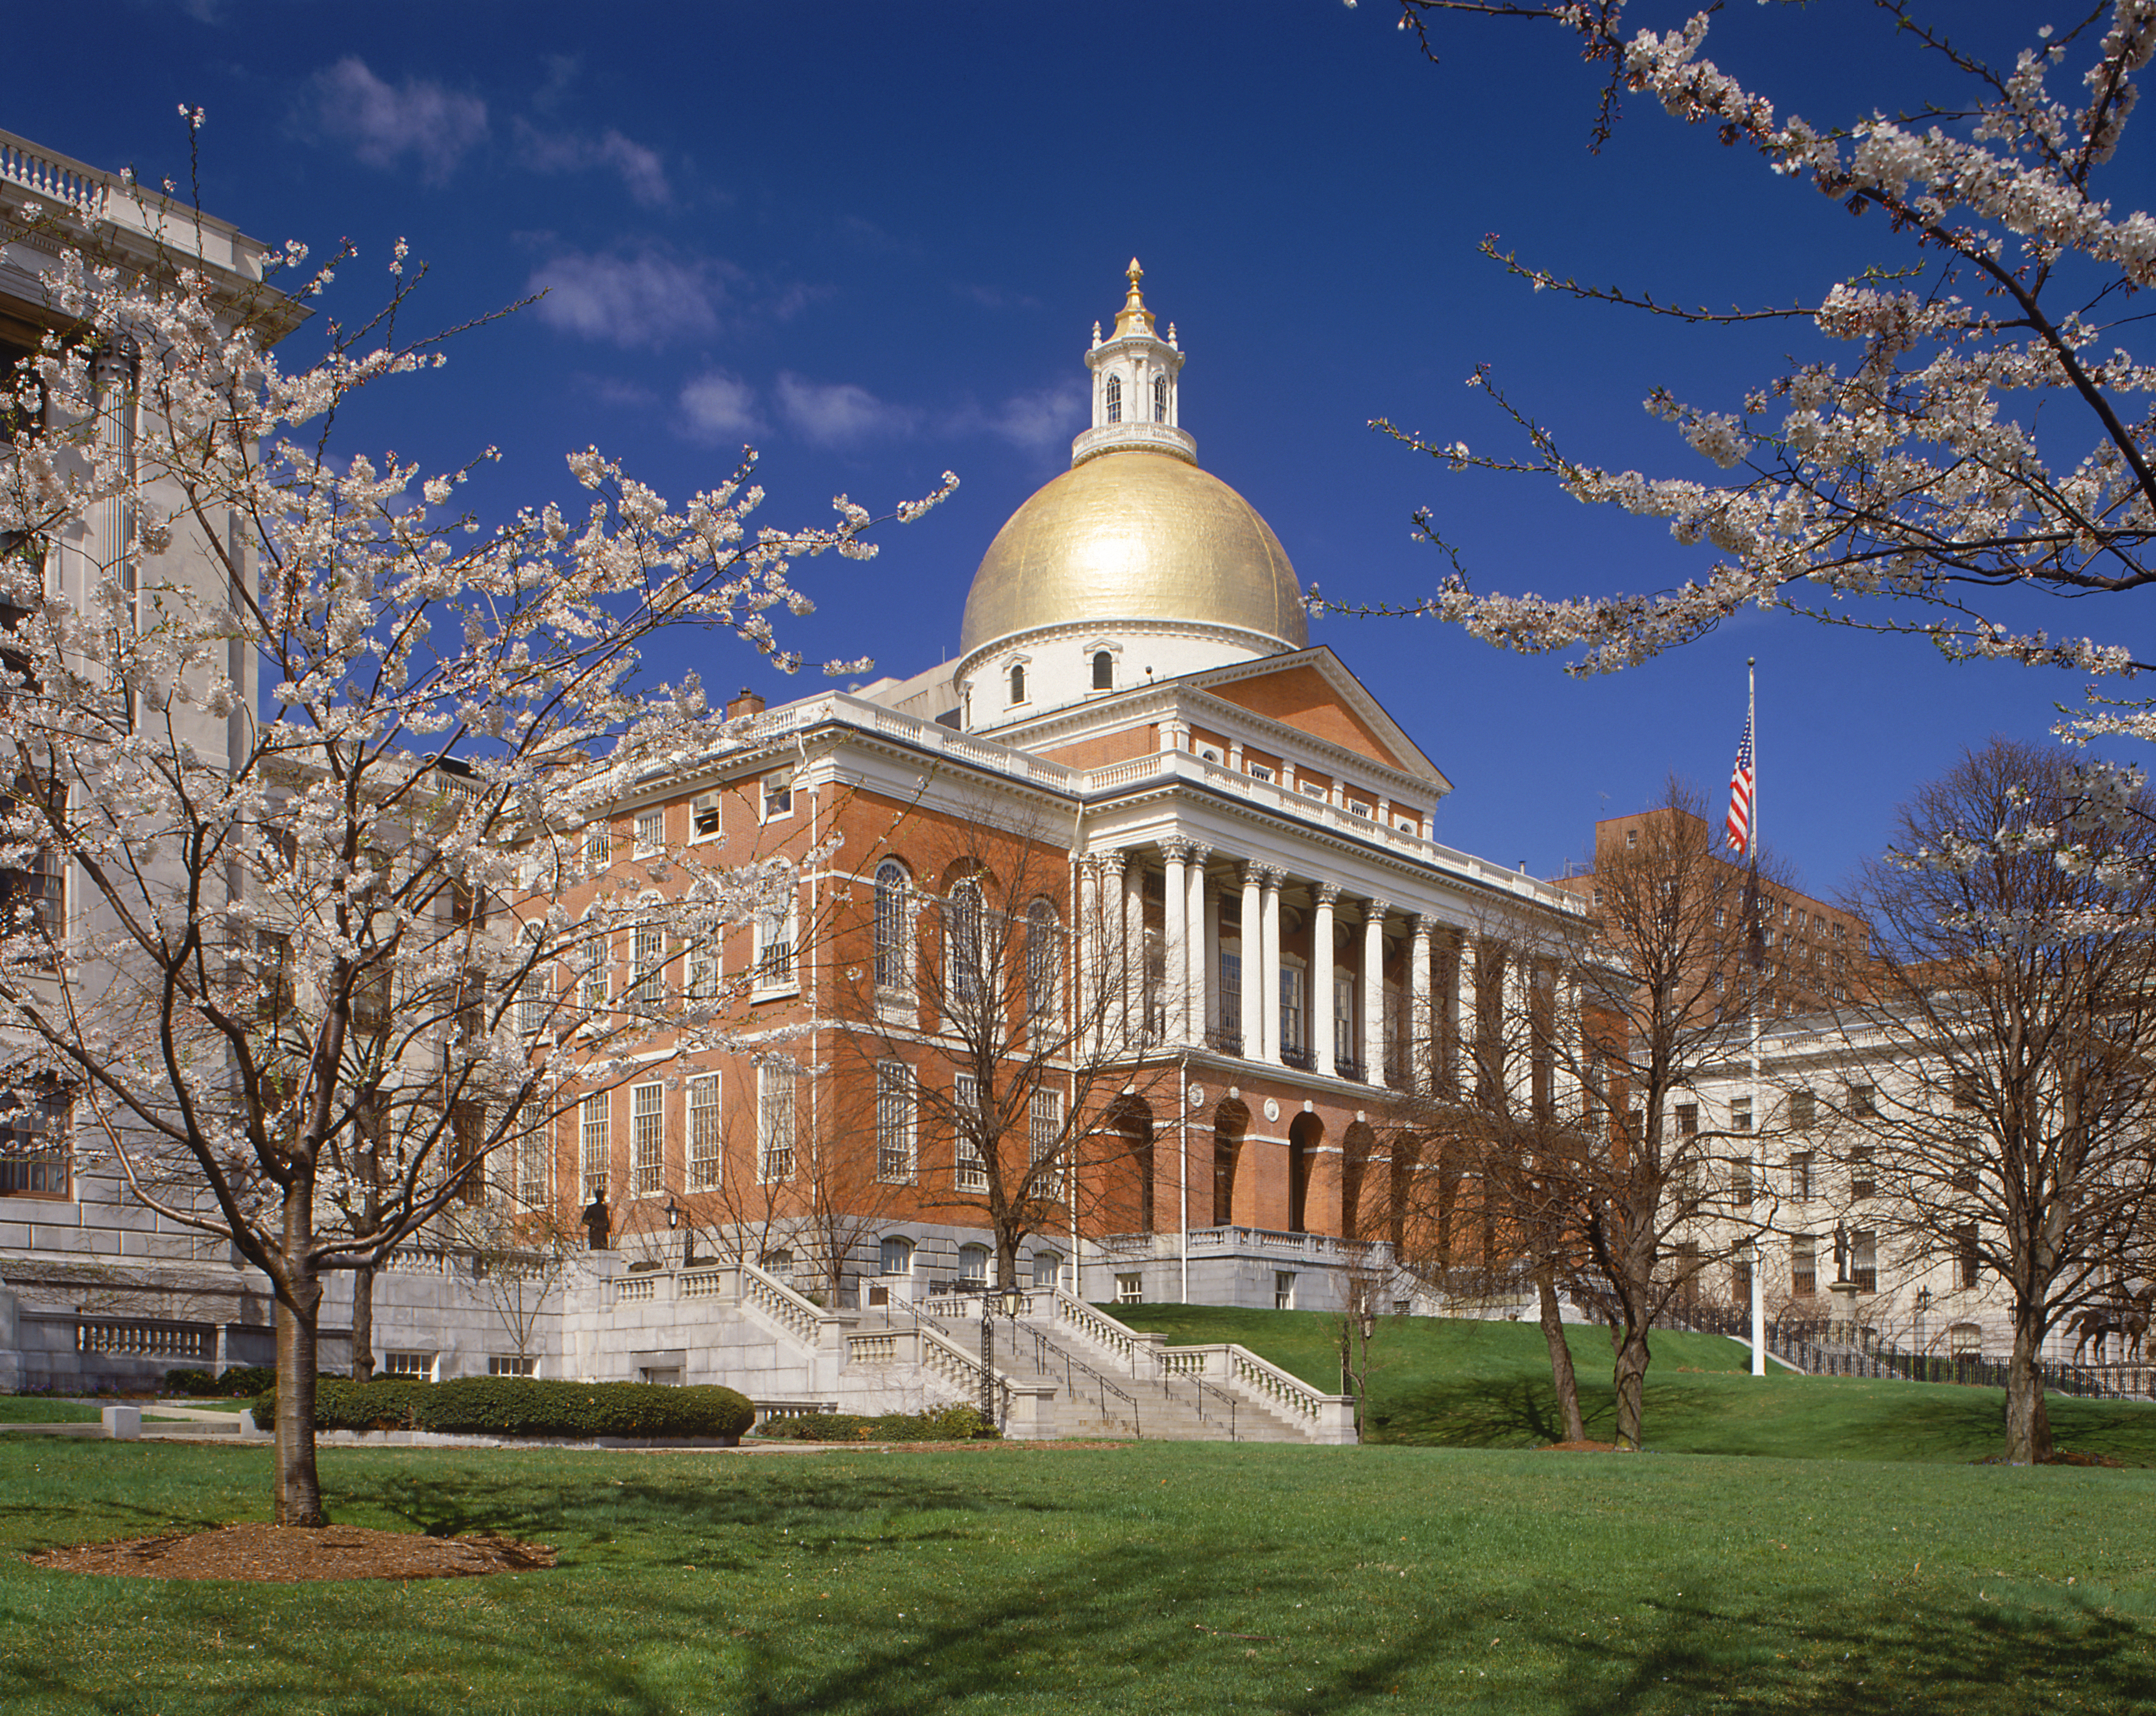 The exterior of the Massachusetts State House. The building is red brick and there is a gold dome. There are white columns on the facade.